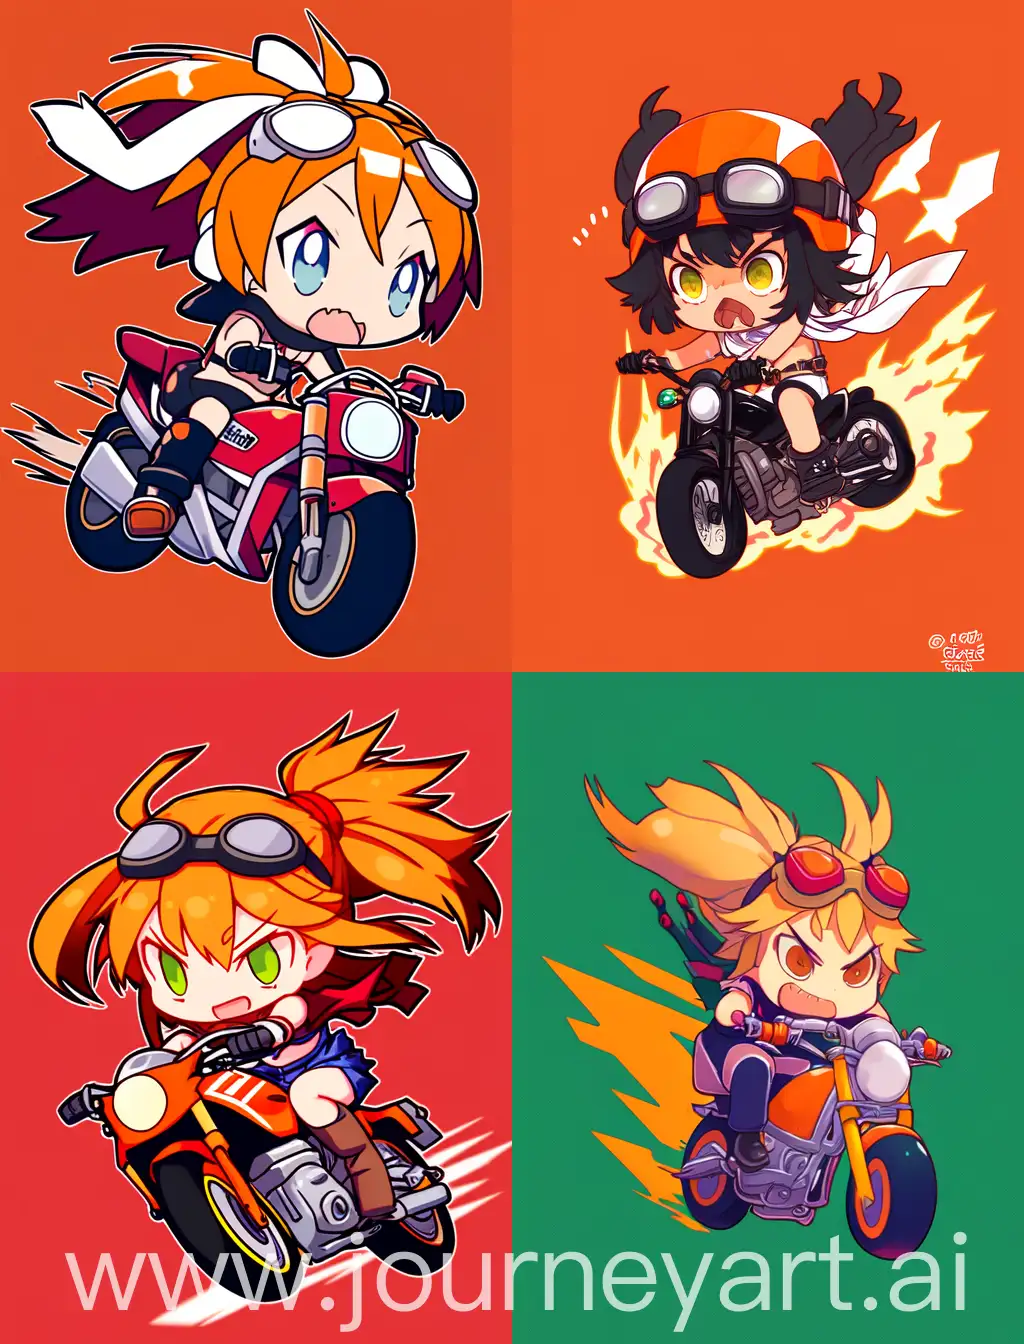 angry chibi anime girl riding a motorcycle, cartoon anime style, with strong lines, with orange solid background